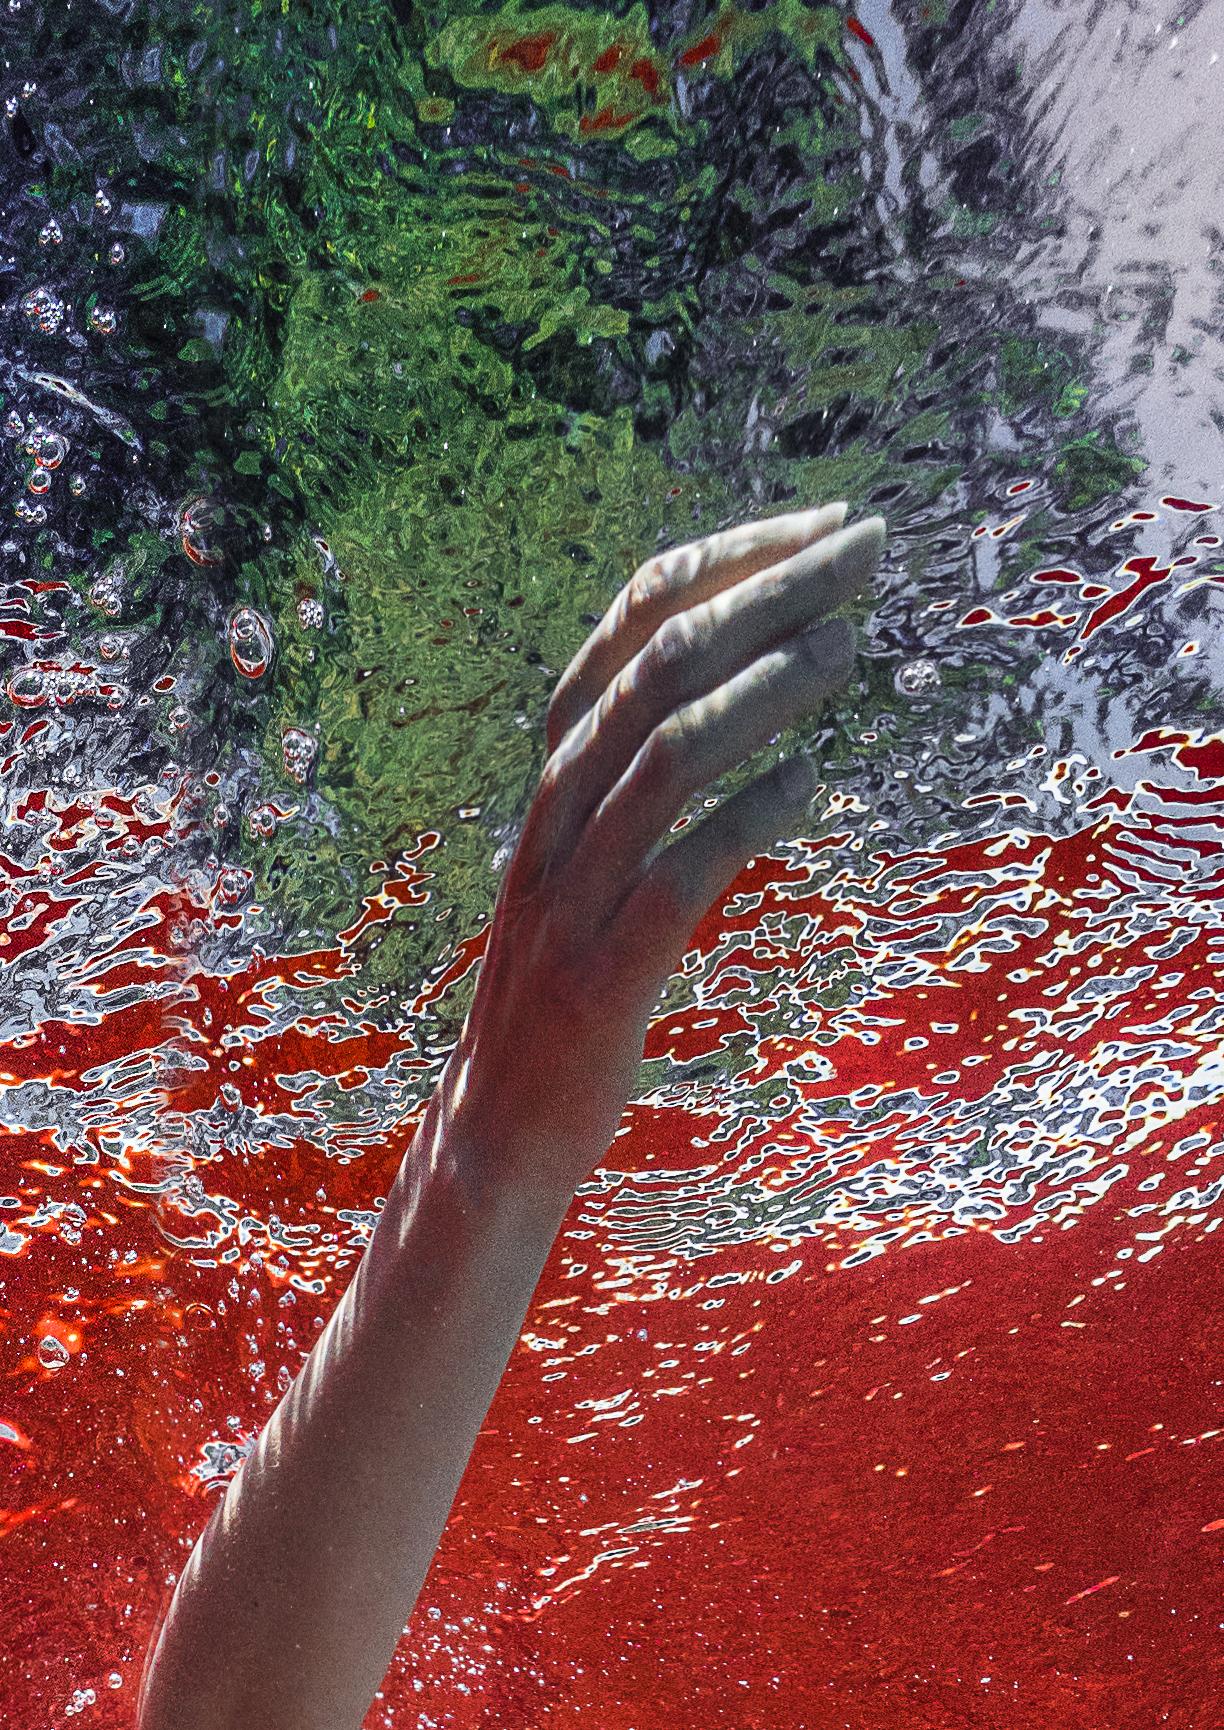 Hot Water - underwater nude photograph - archival pigment print 24